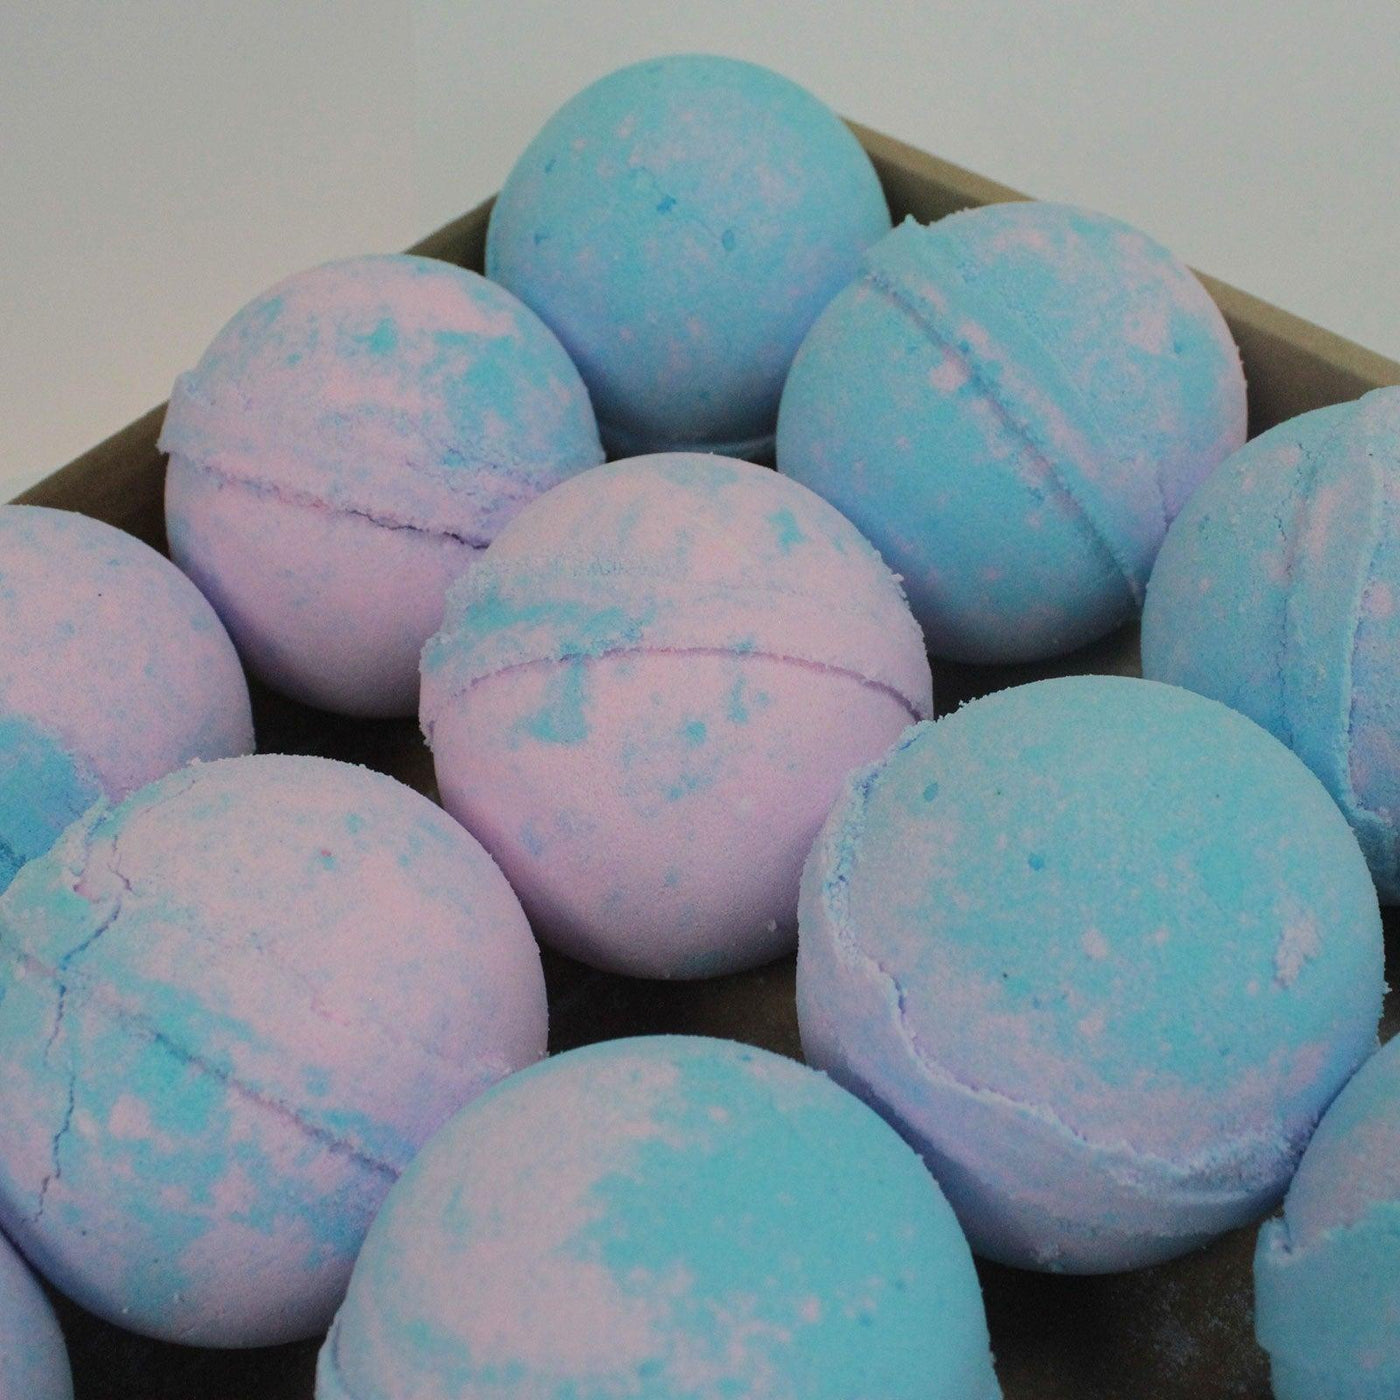 Baby Powder Floral Scent Shea Butter Bath Bomb